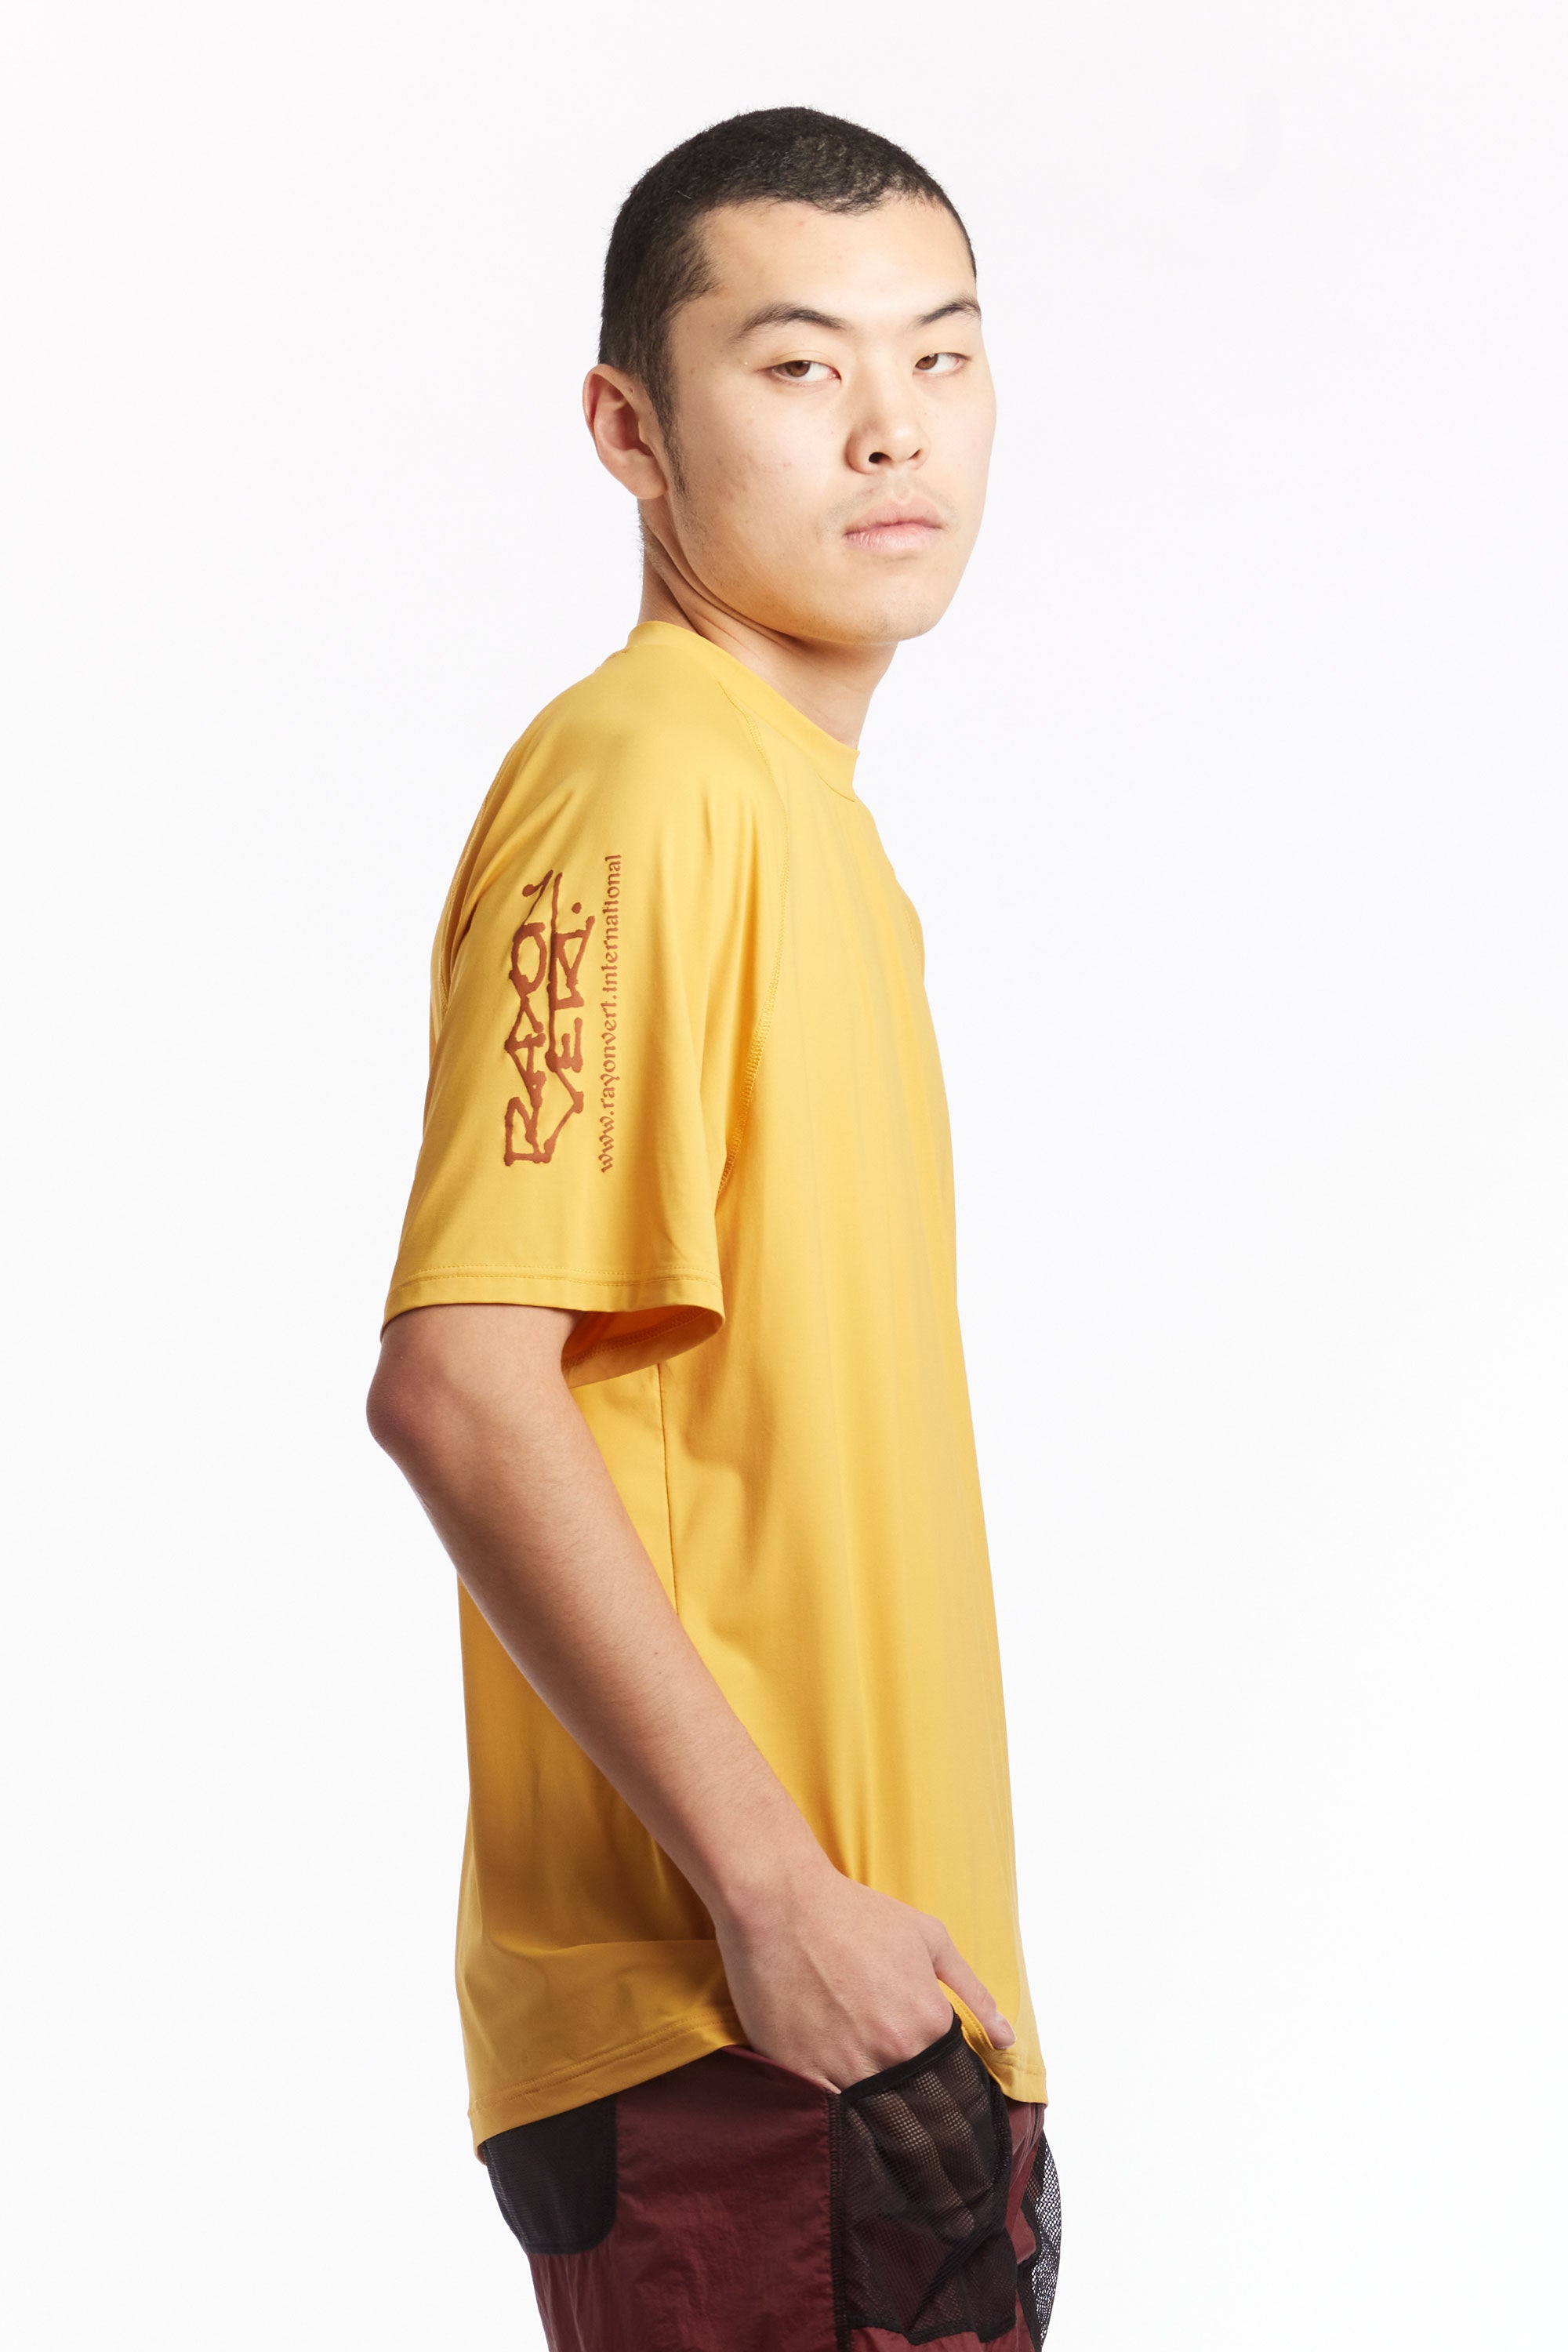 The RAYON VERT - MILES SPORTS T-SHIRT  available online with global shipping, and in PAM Stores Melbourne and Sydney.